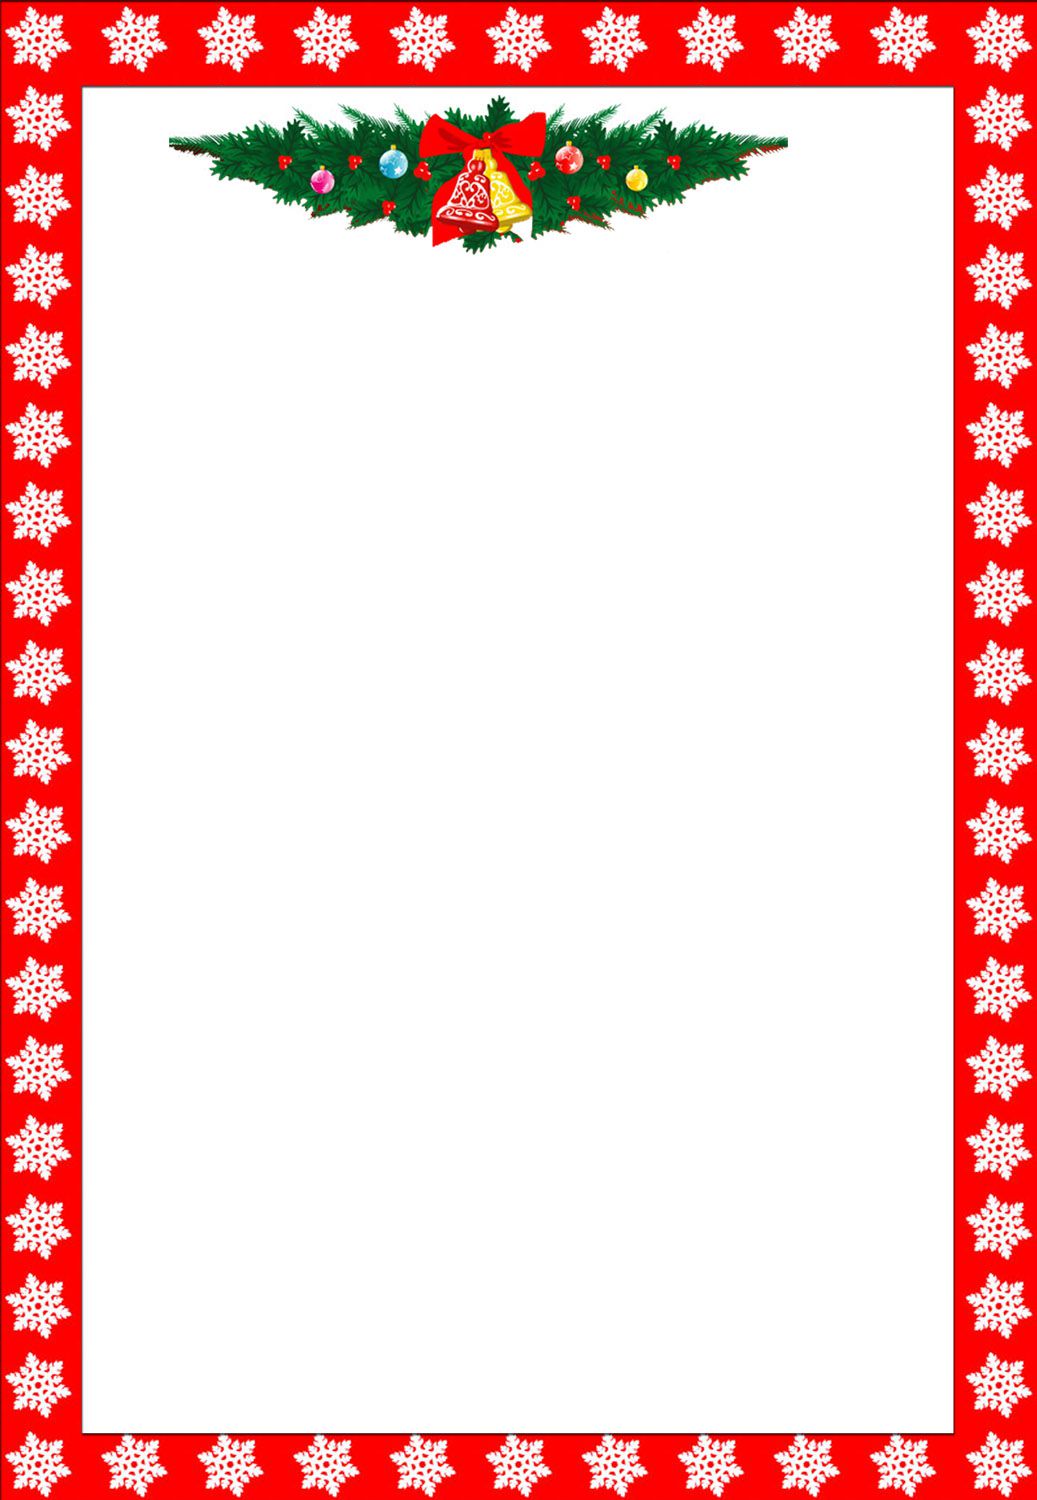 The best free christmas borders and frames